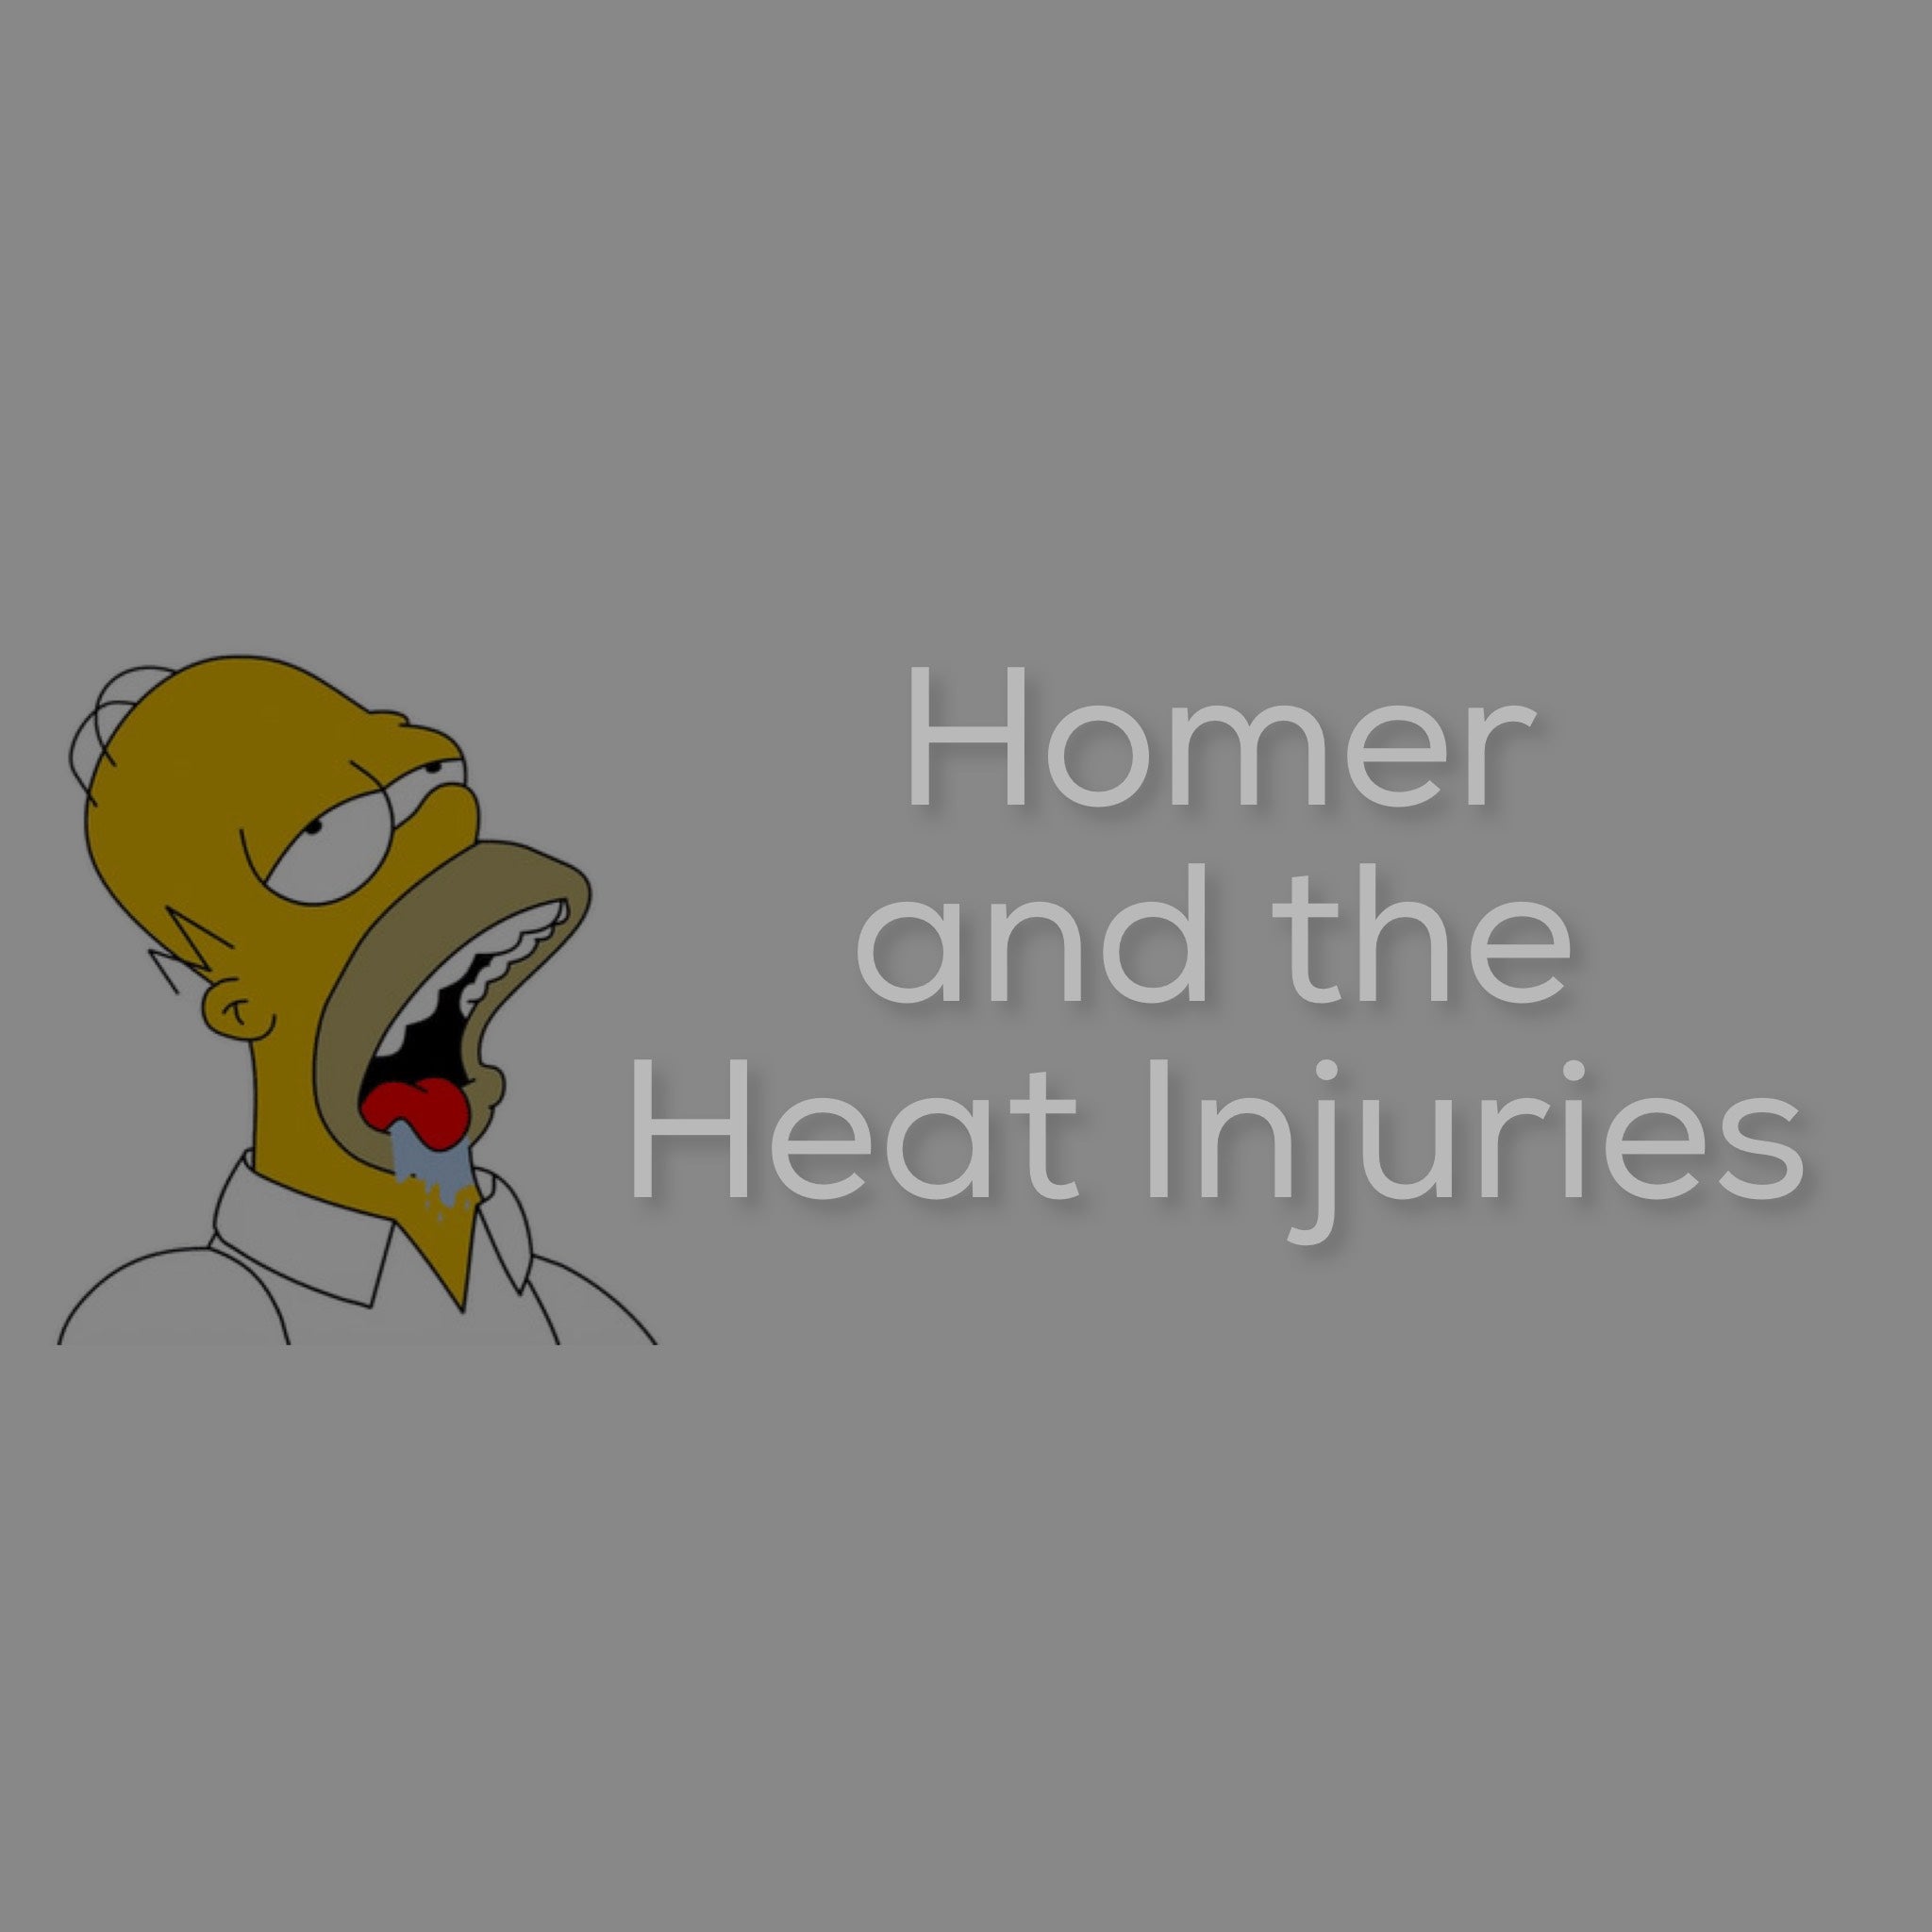 Homer and the Heat Injuries